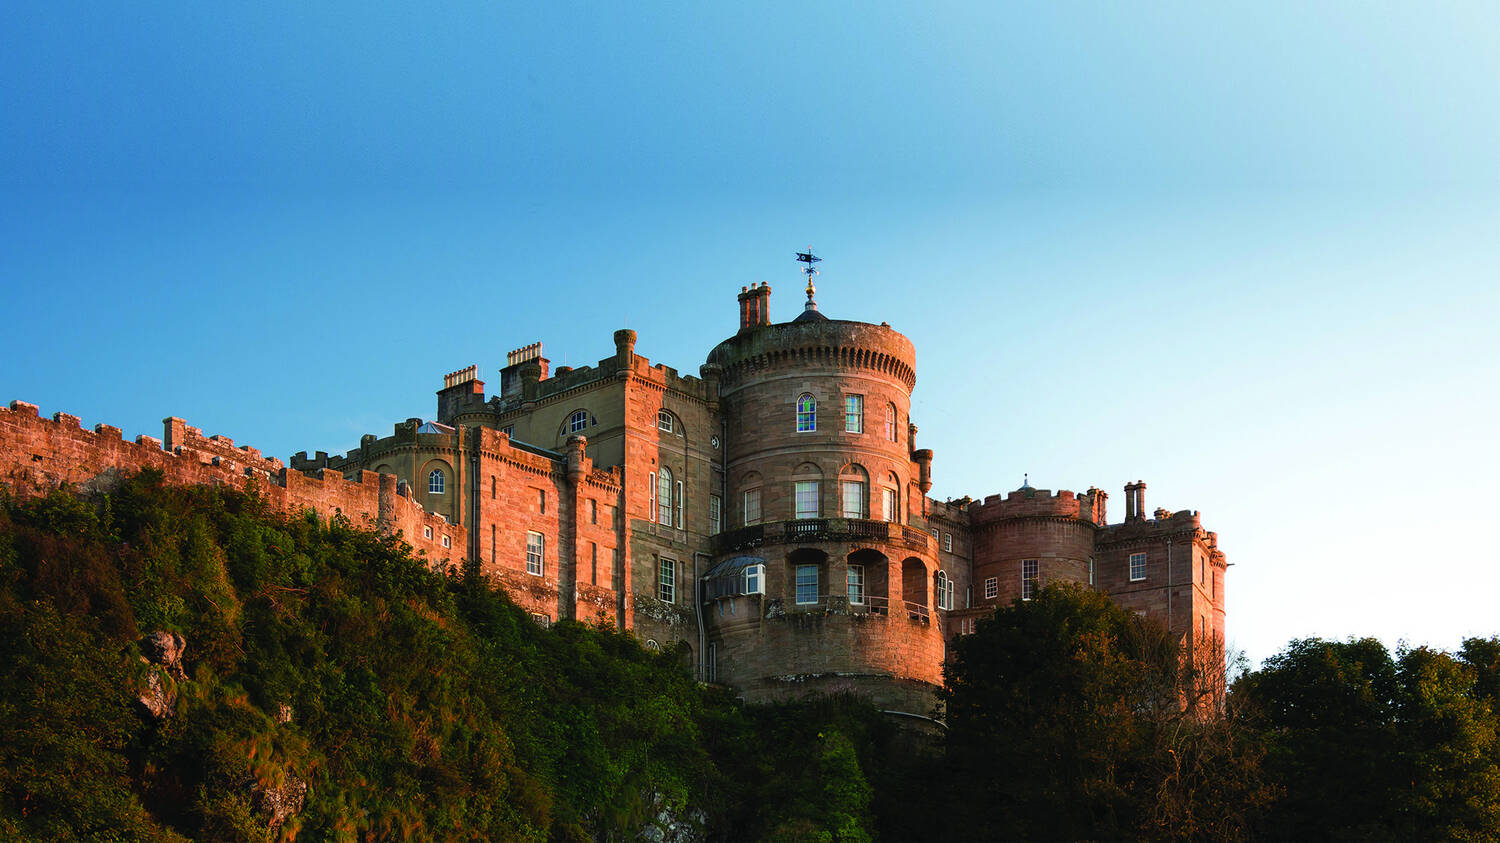 A view of Culzean Castle at dusk, with the setting sun making the walls glow red. The castle is seen from the beach below.